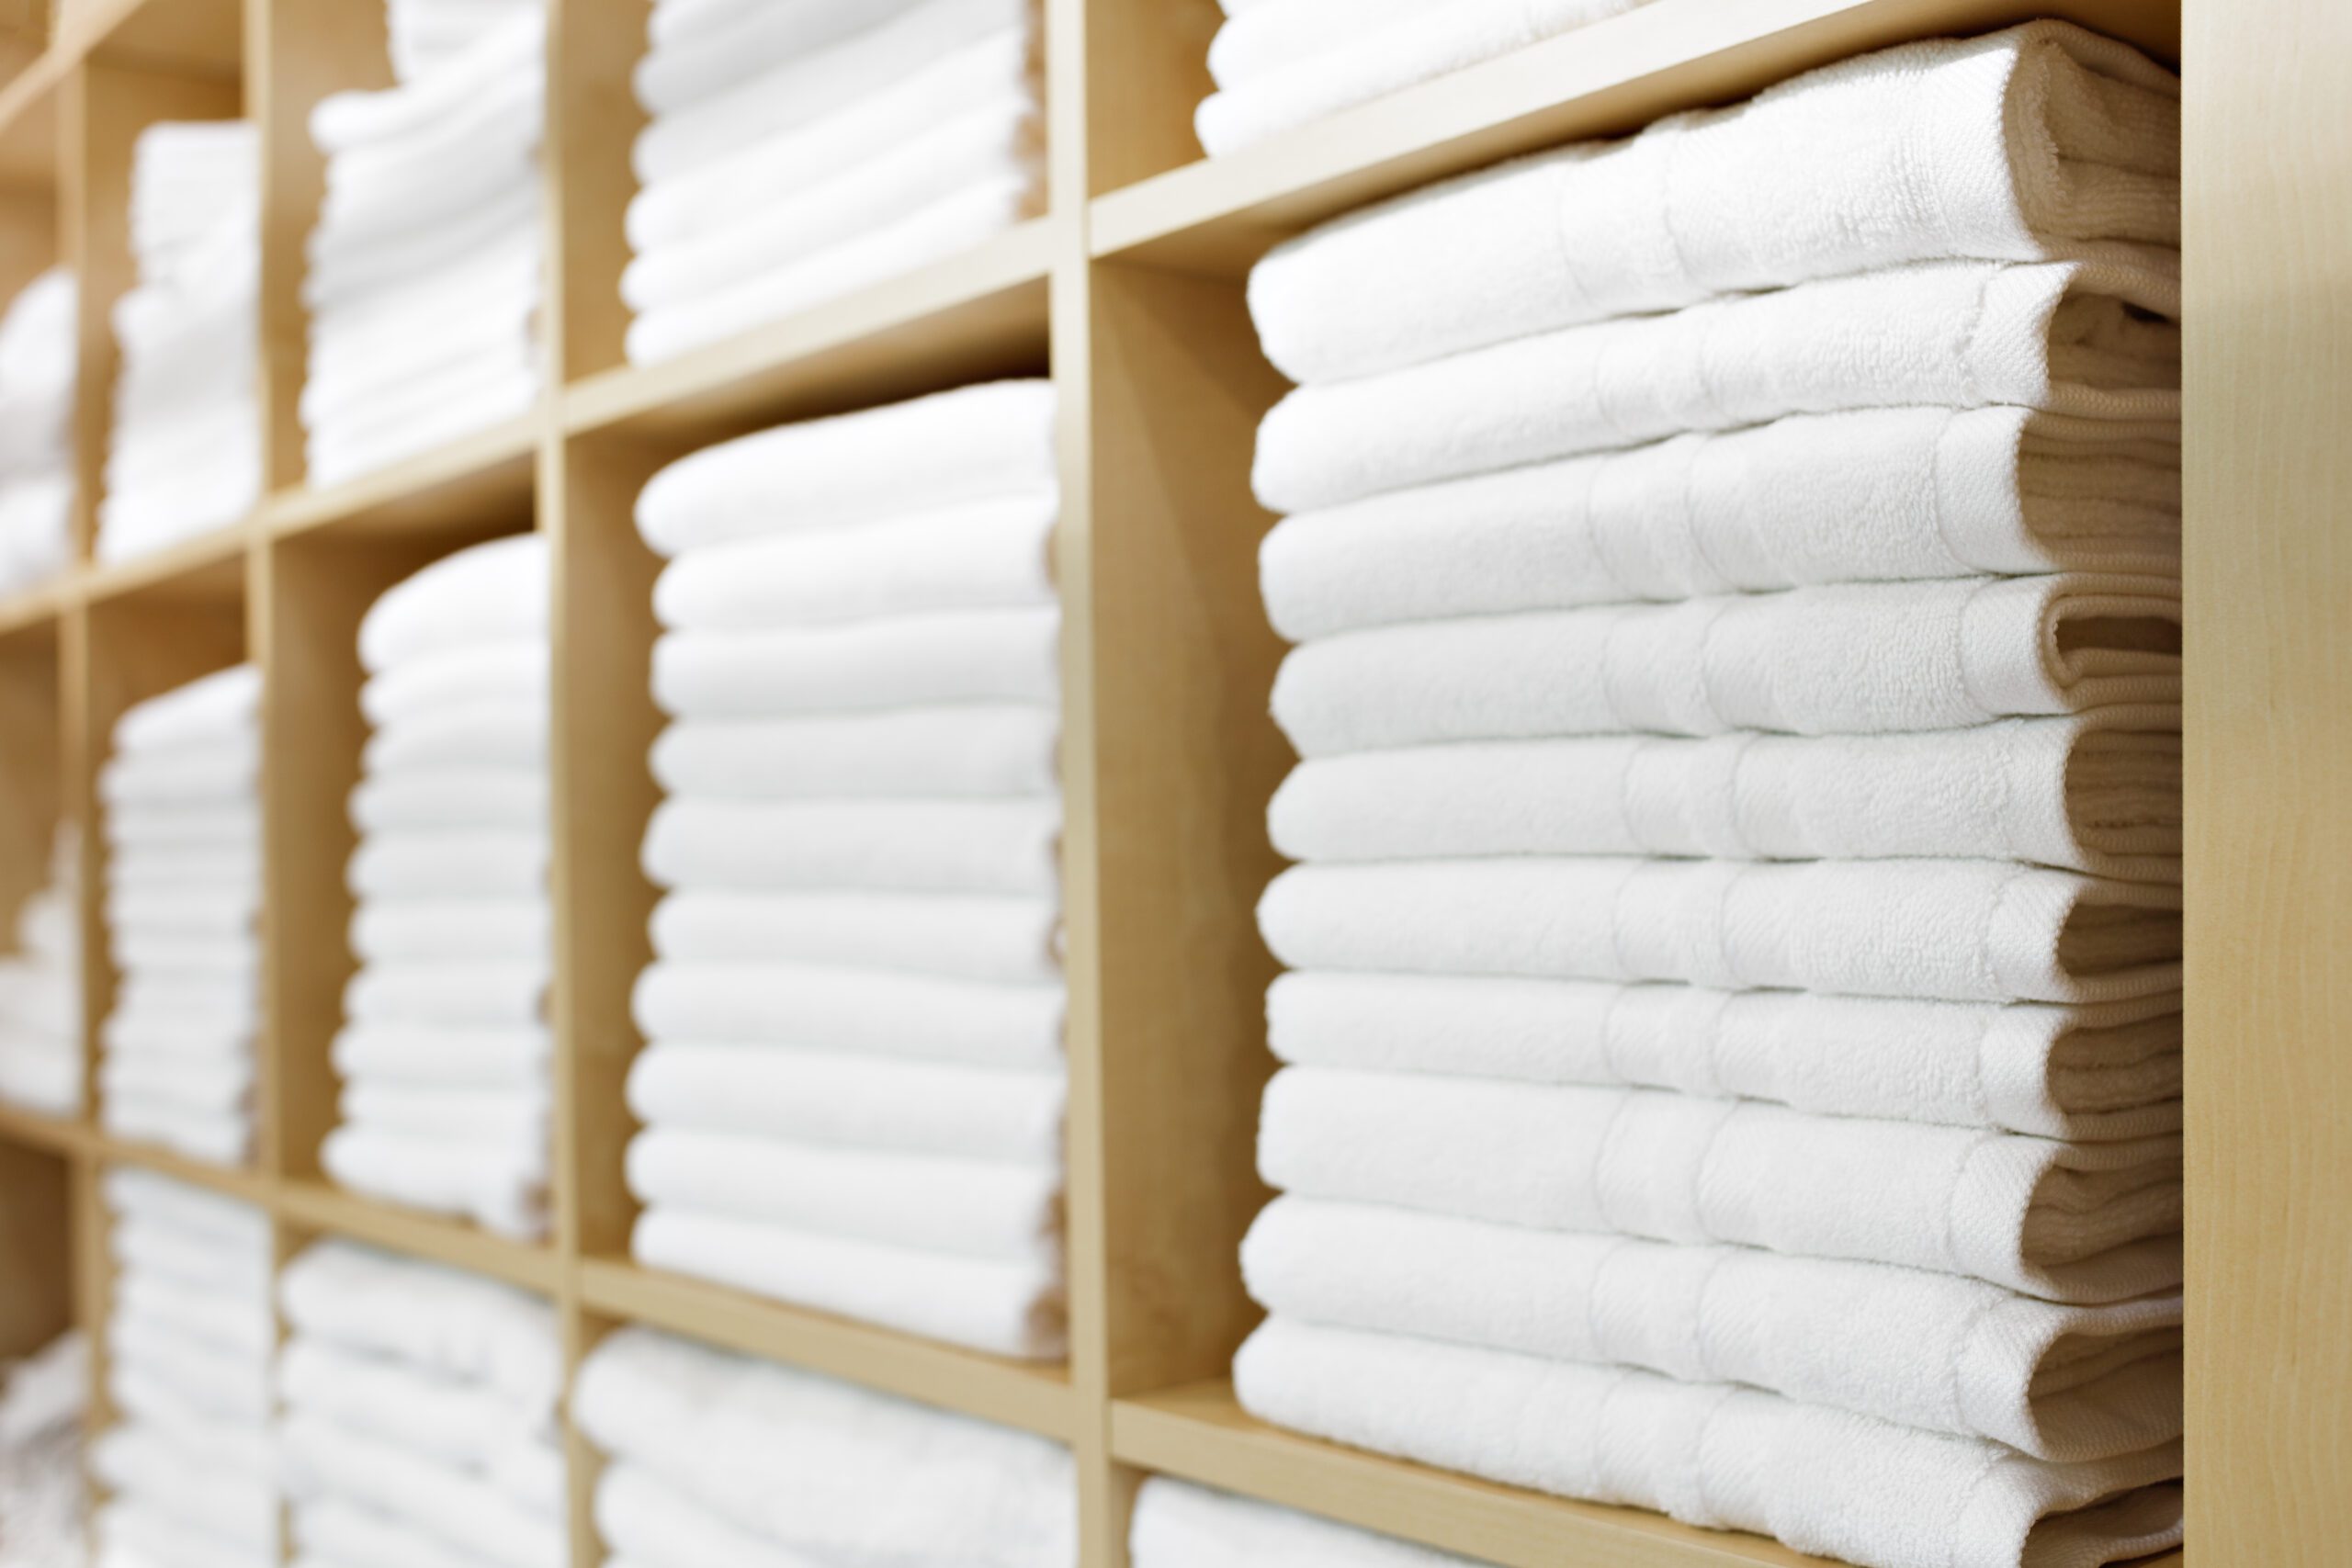 Fresh White Hotel Towels Folded and Stacked on a Shelf